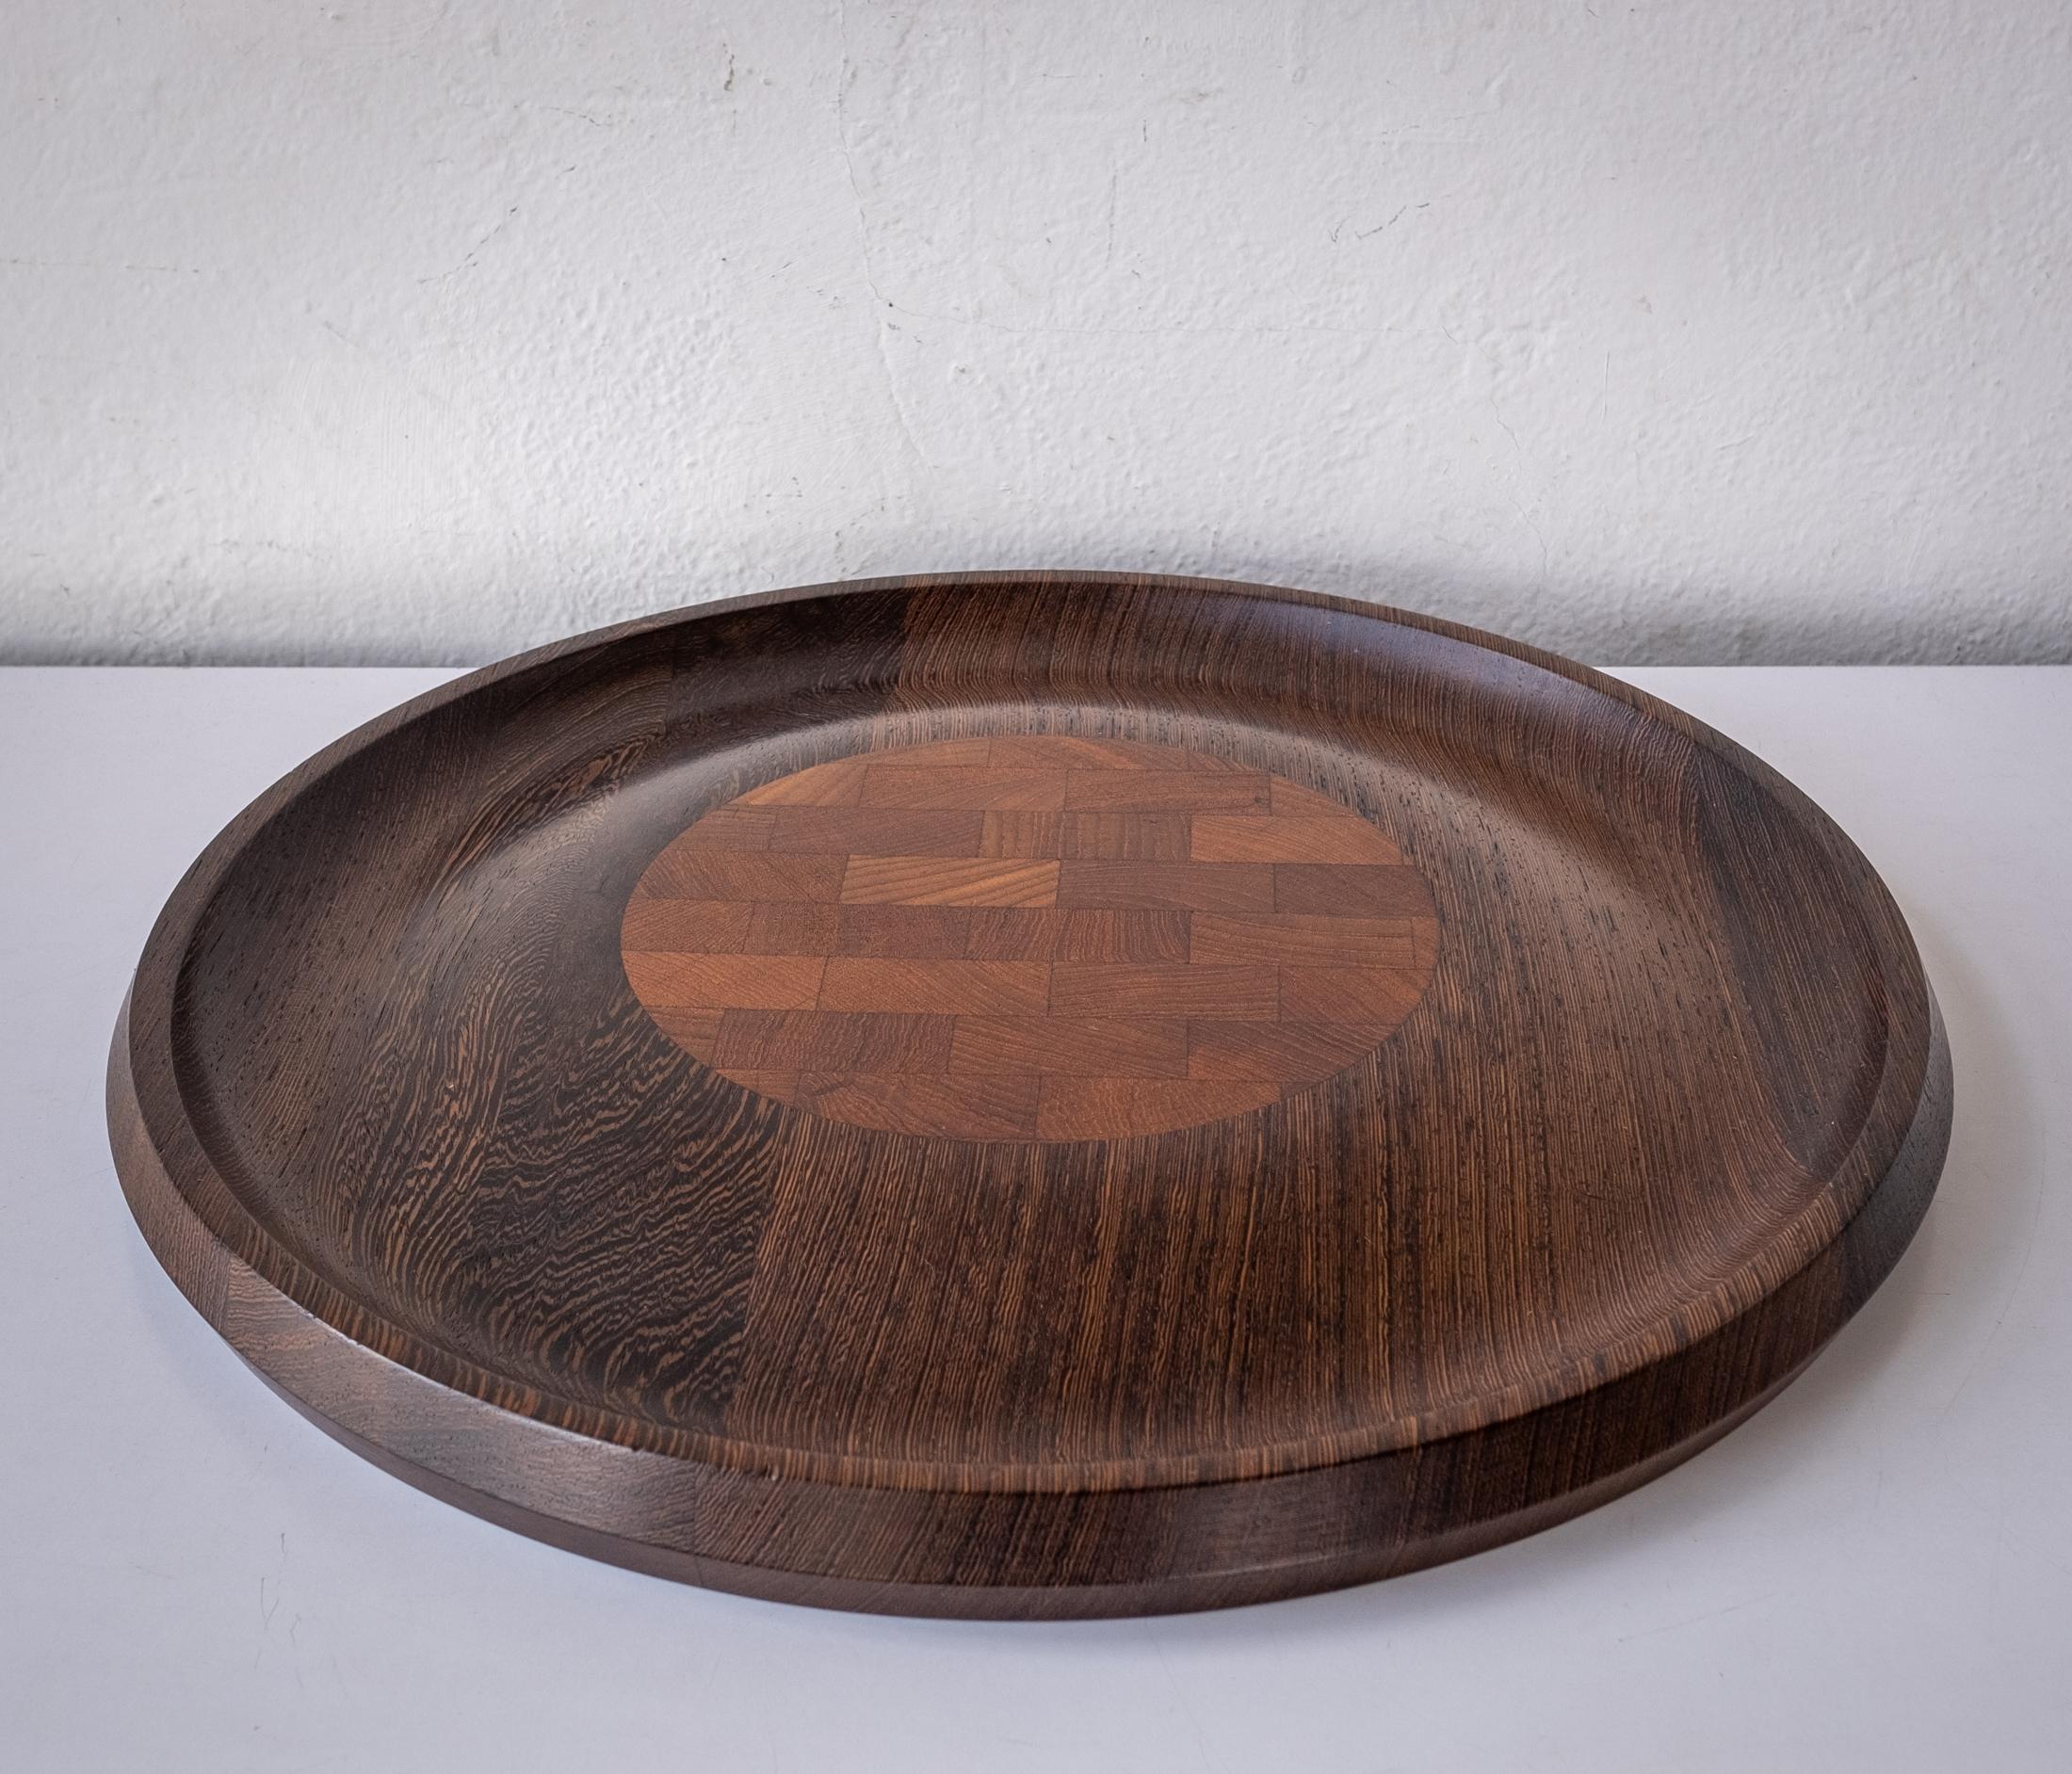 Dansk rare woods tray by Jens Quistgaard. Finely crafted of solid exoctic woods, including Wenge. Stamped JHQ Denark.